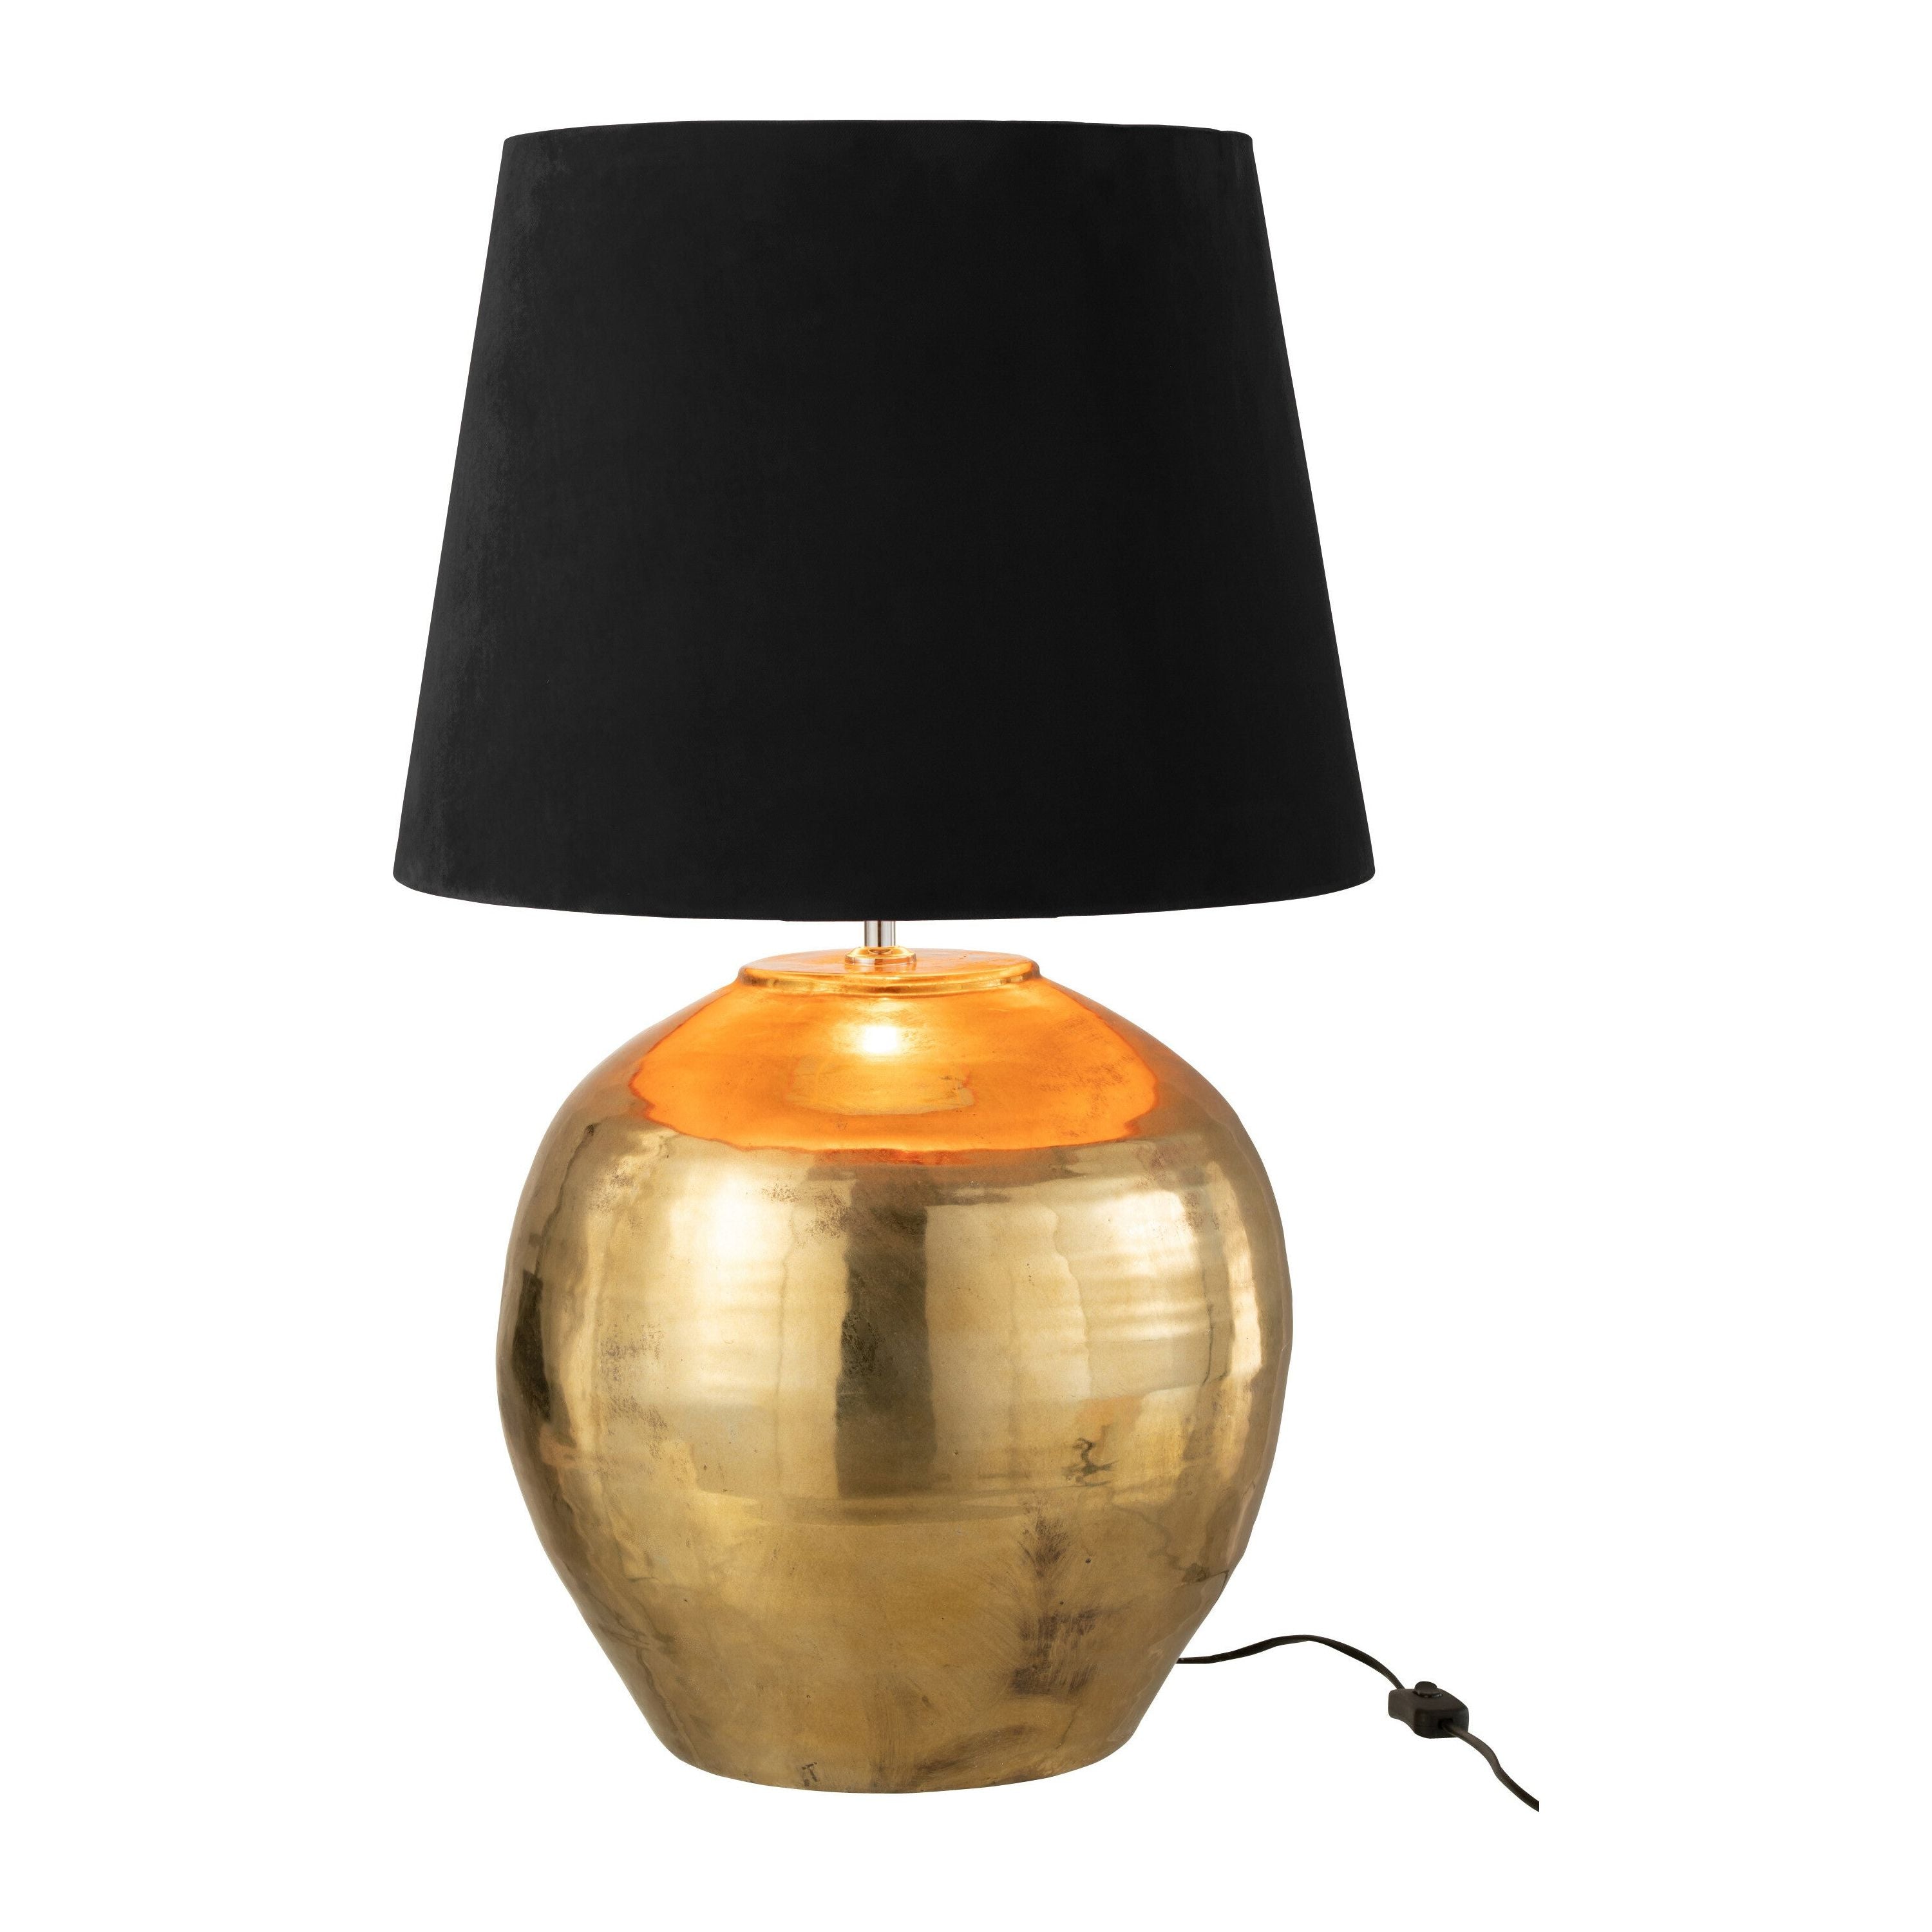 Lampshade For 38783 Black